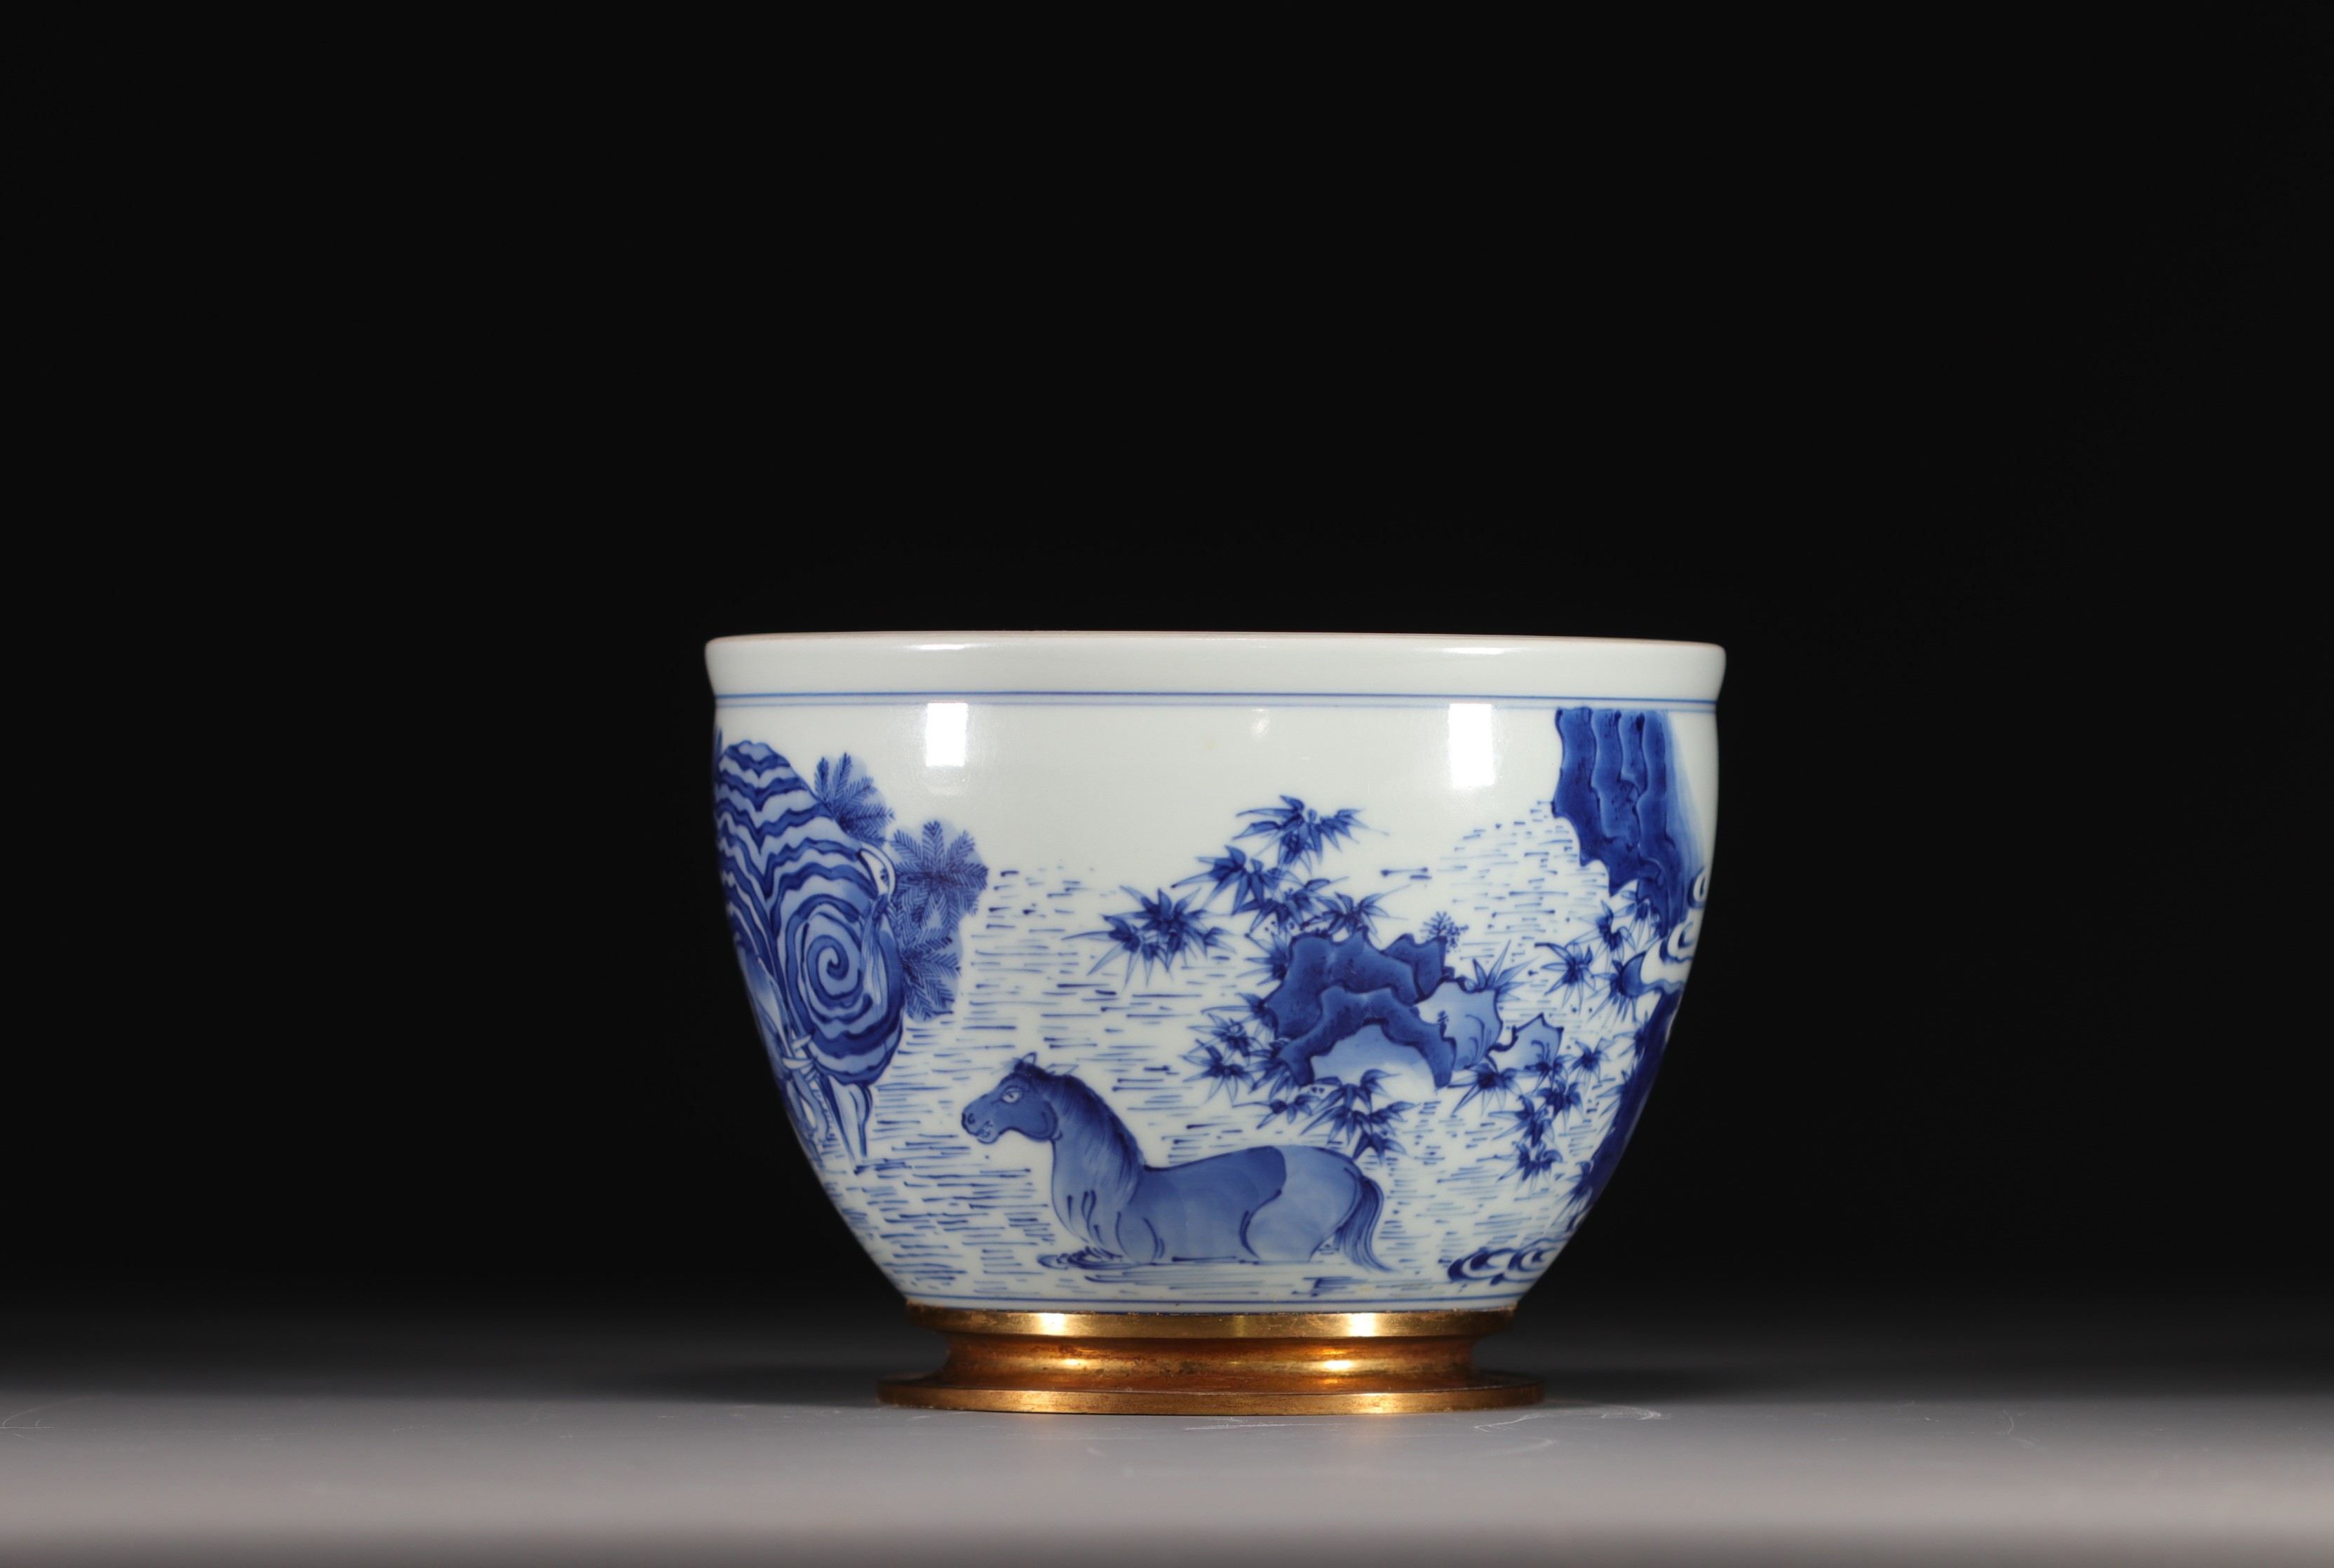 China - A white-blue porcelain vase decorated with elephant, horse and rabbit, Qing period.